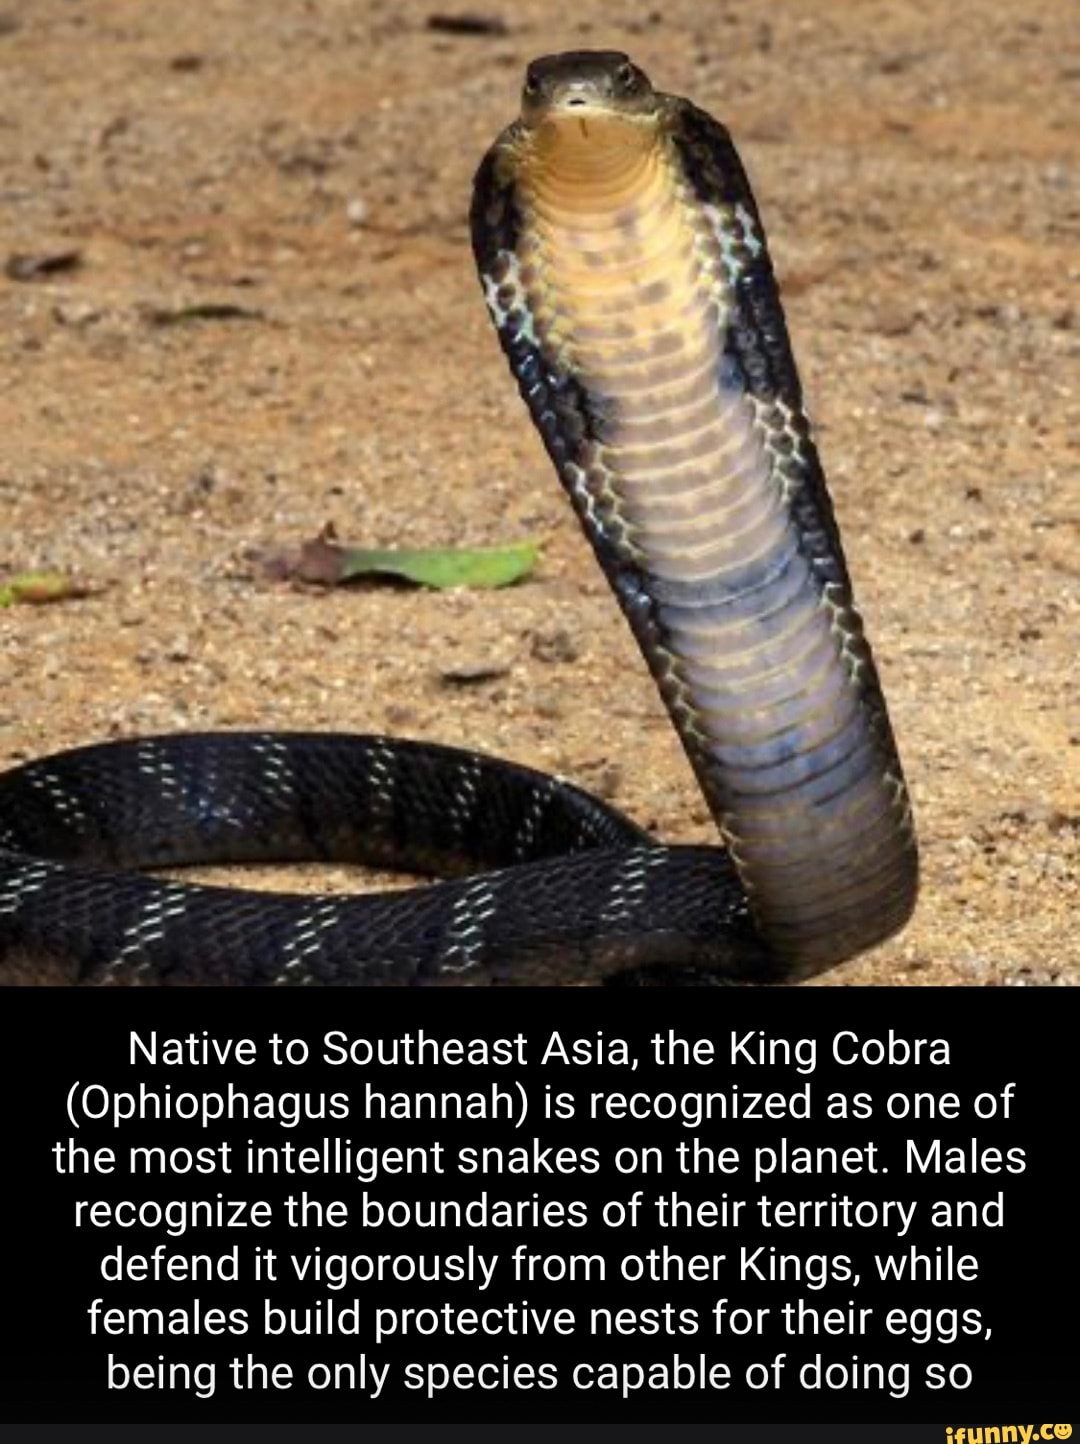 Did you know that King cobra is not a true cobra? ☝️#kingcobra #ophiop